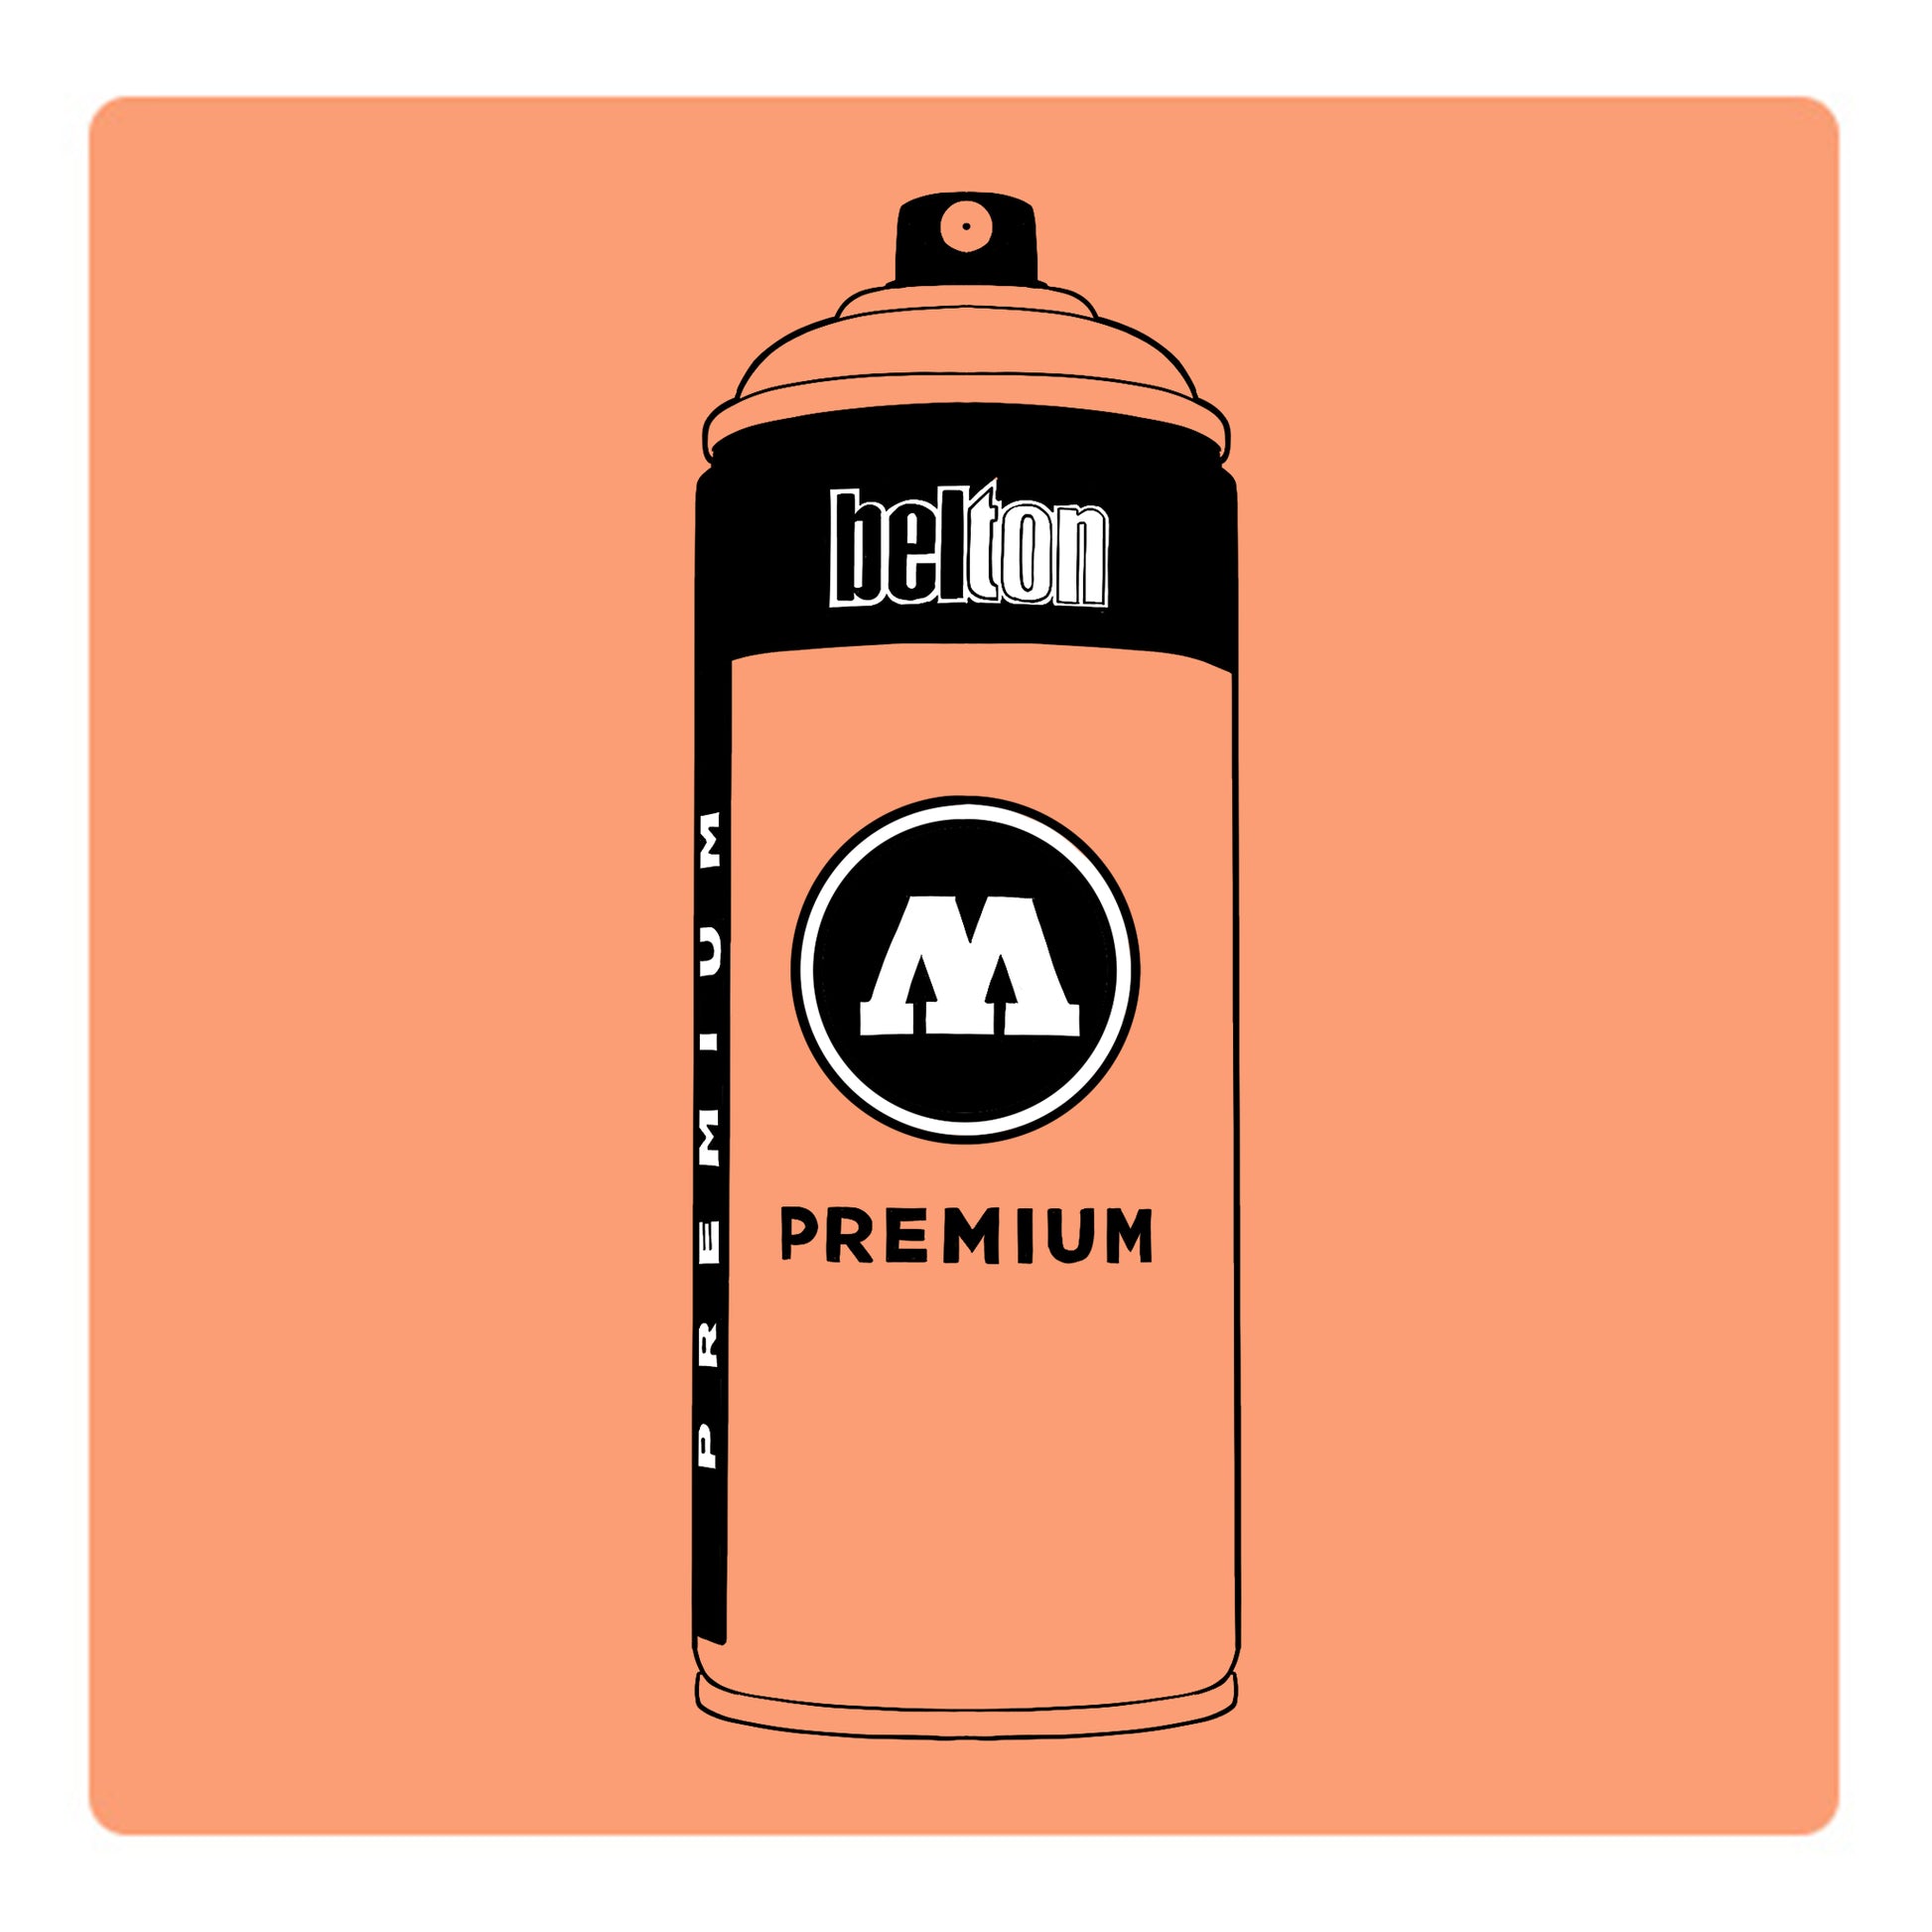 A black outline drawing of a peach spray paint can with the words "belton","premium" and the letter"M" written on the face in black and white font. The background is a color swatch of the same peach with a white border.